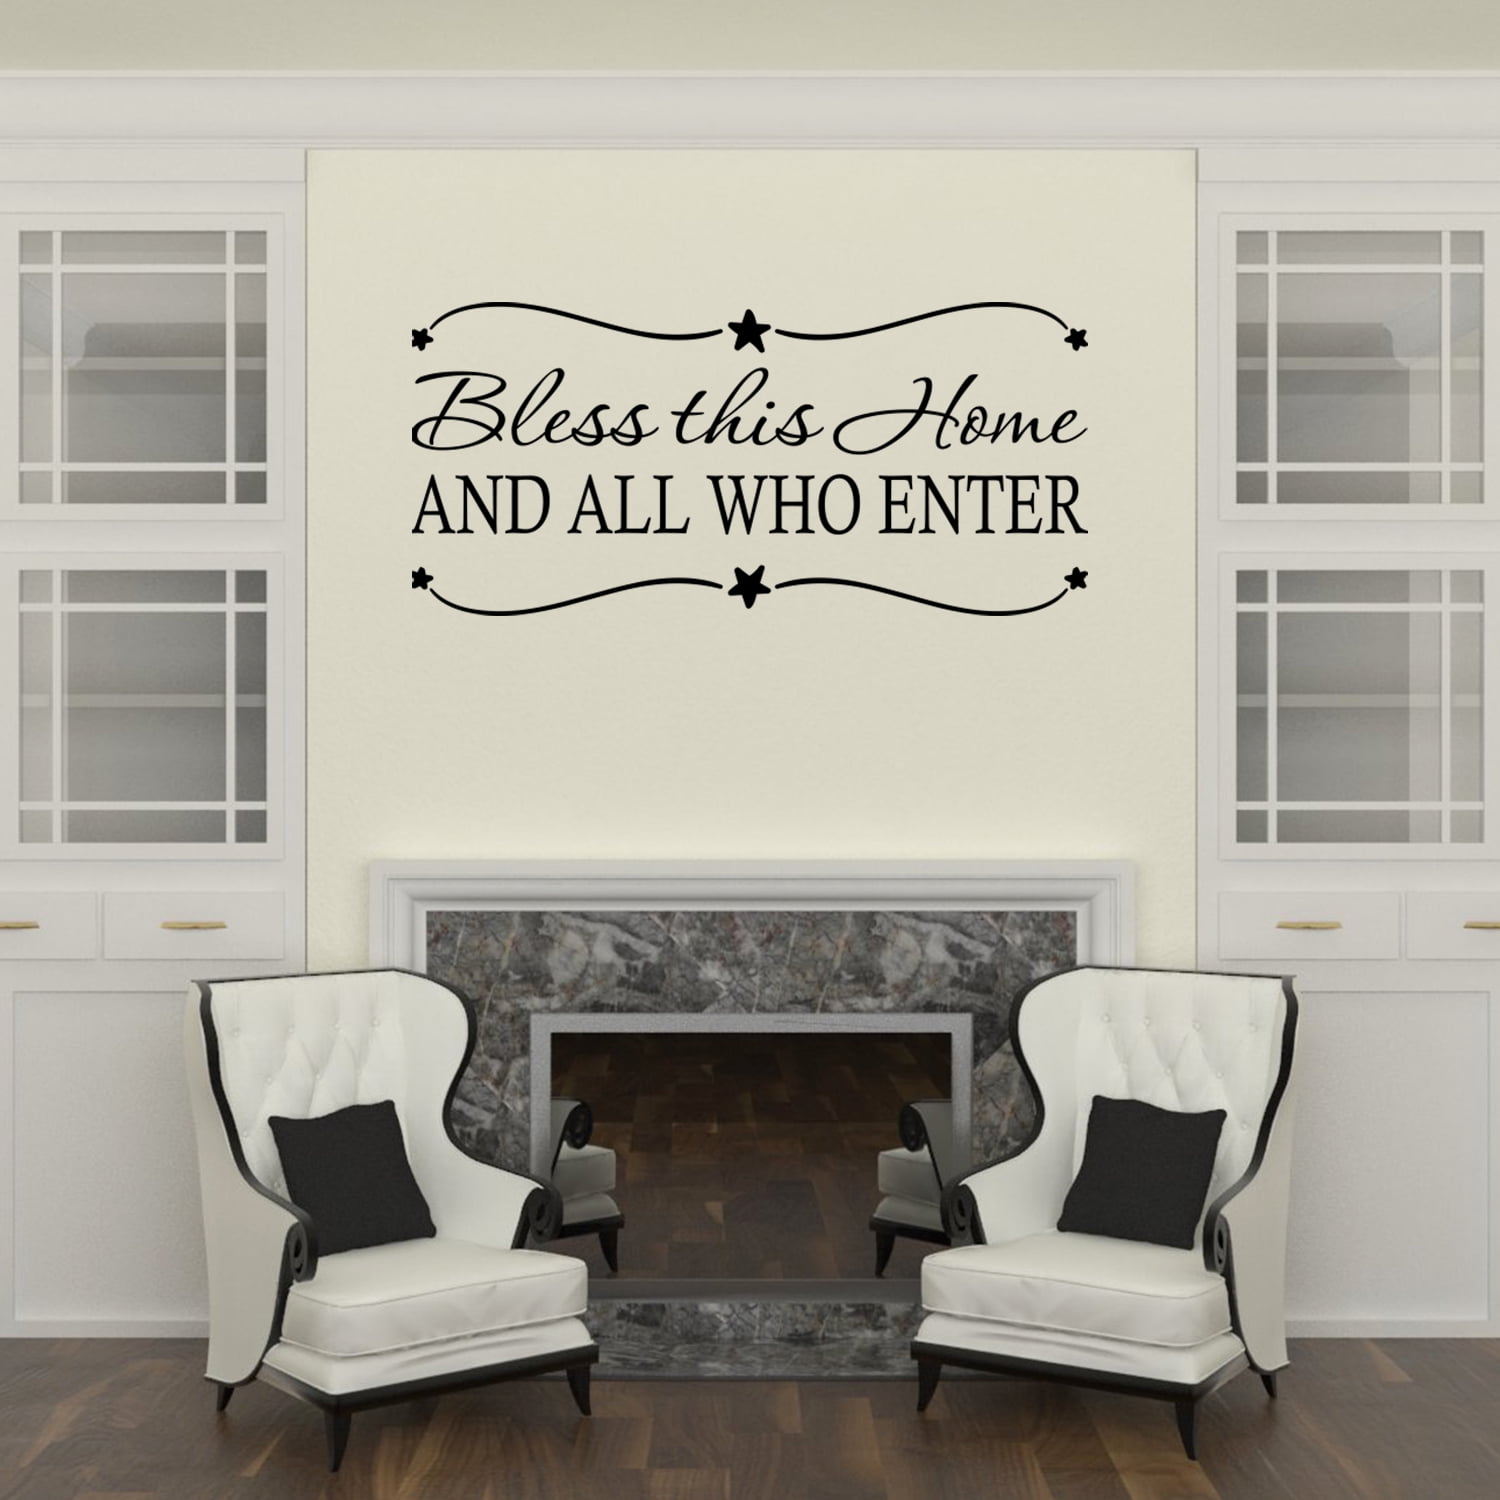 Bless This Home Vinyl Decal Wall Sticker Words Lettering Entryway Living Room 